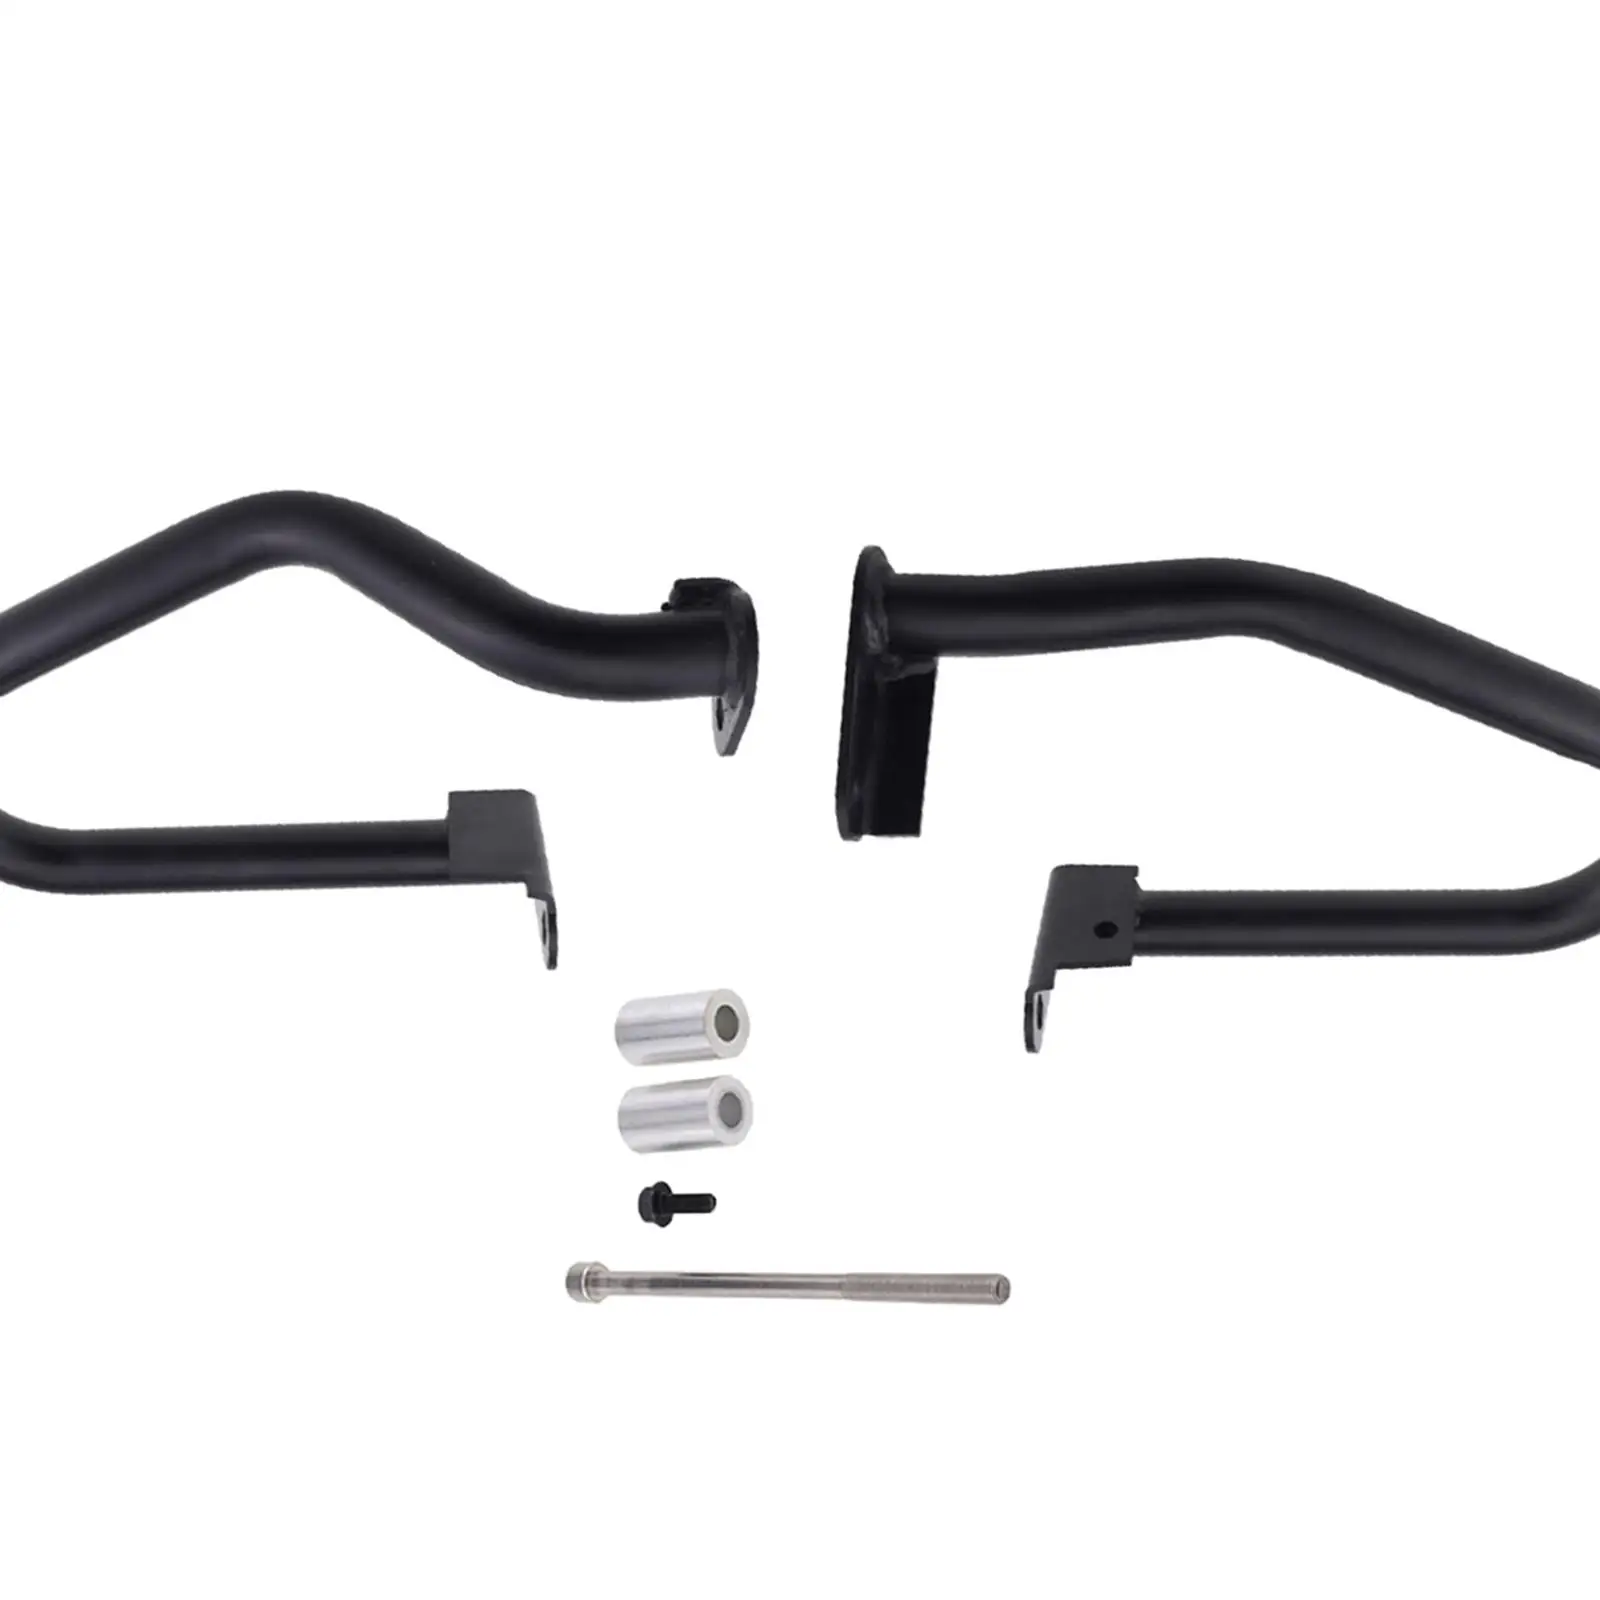 Front Lower Engine Guard Protection Bumper Fits for Cmx 1100